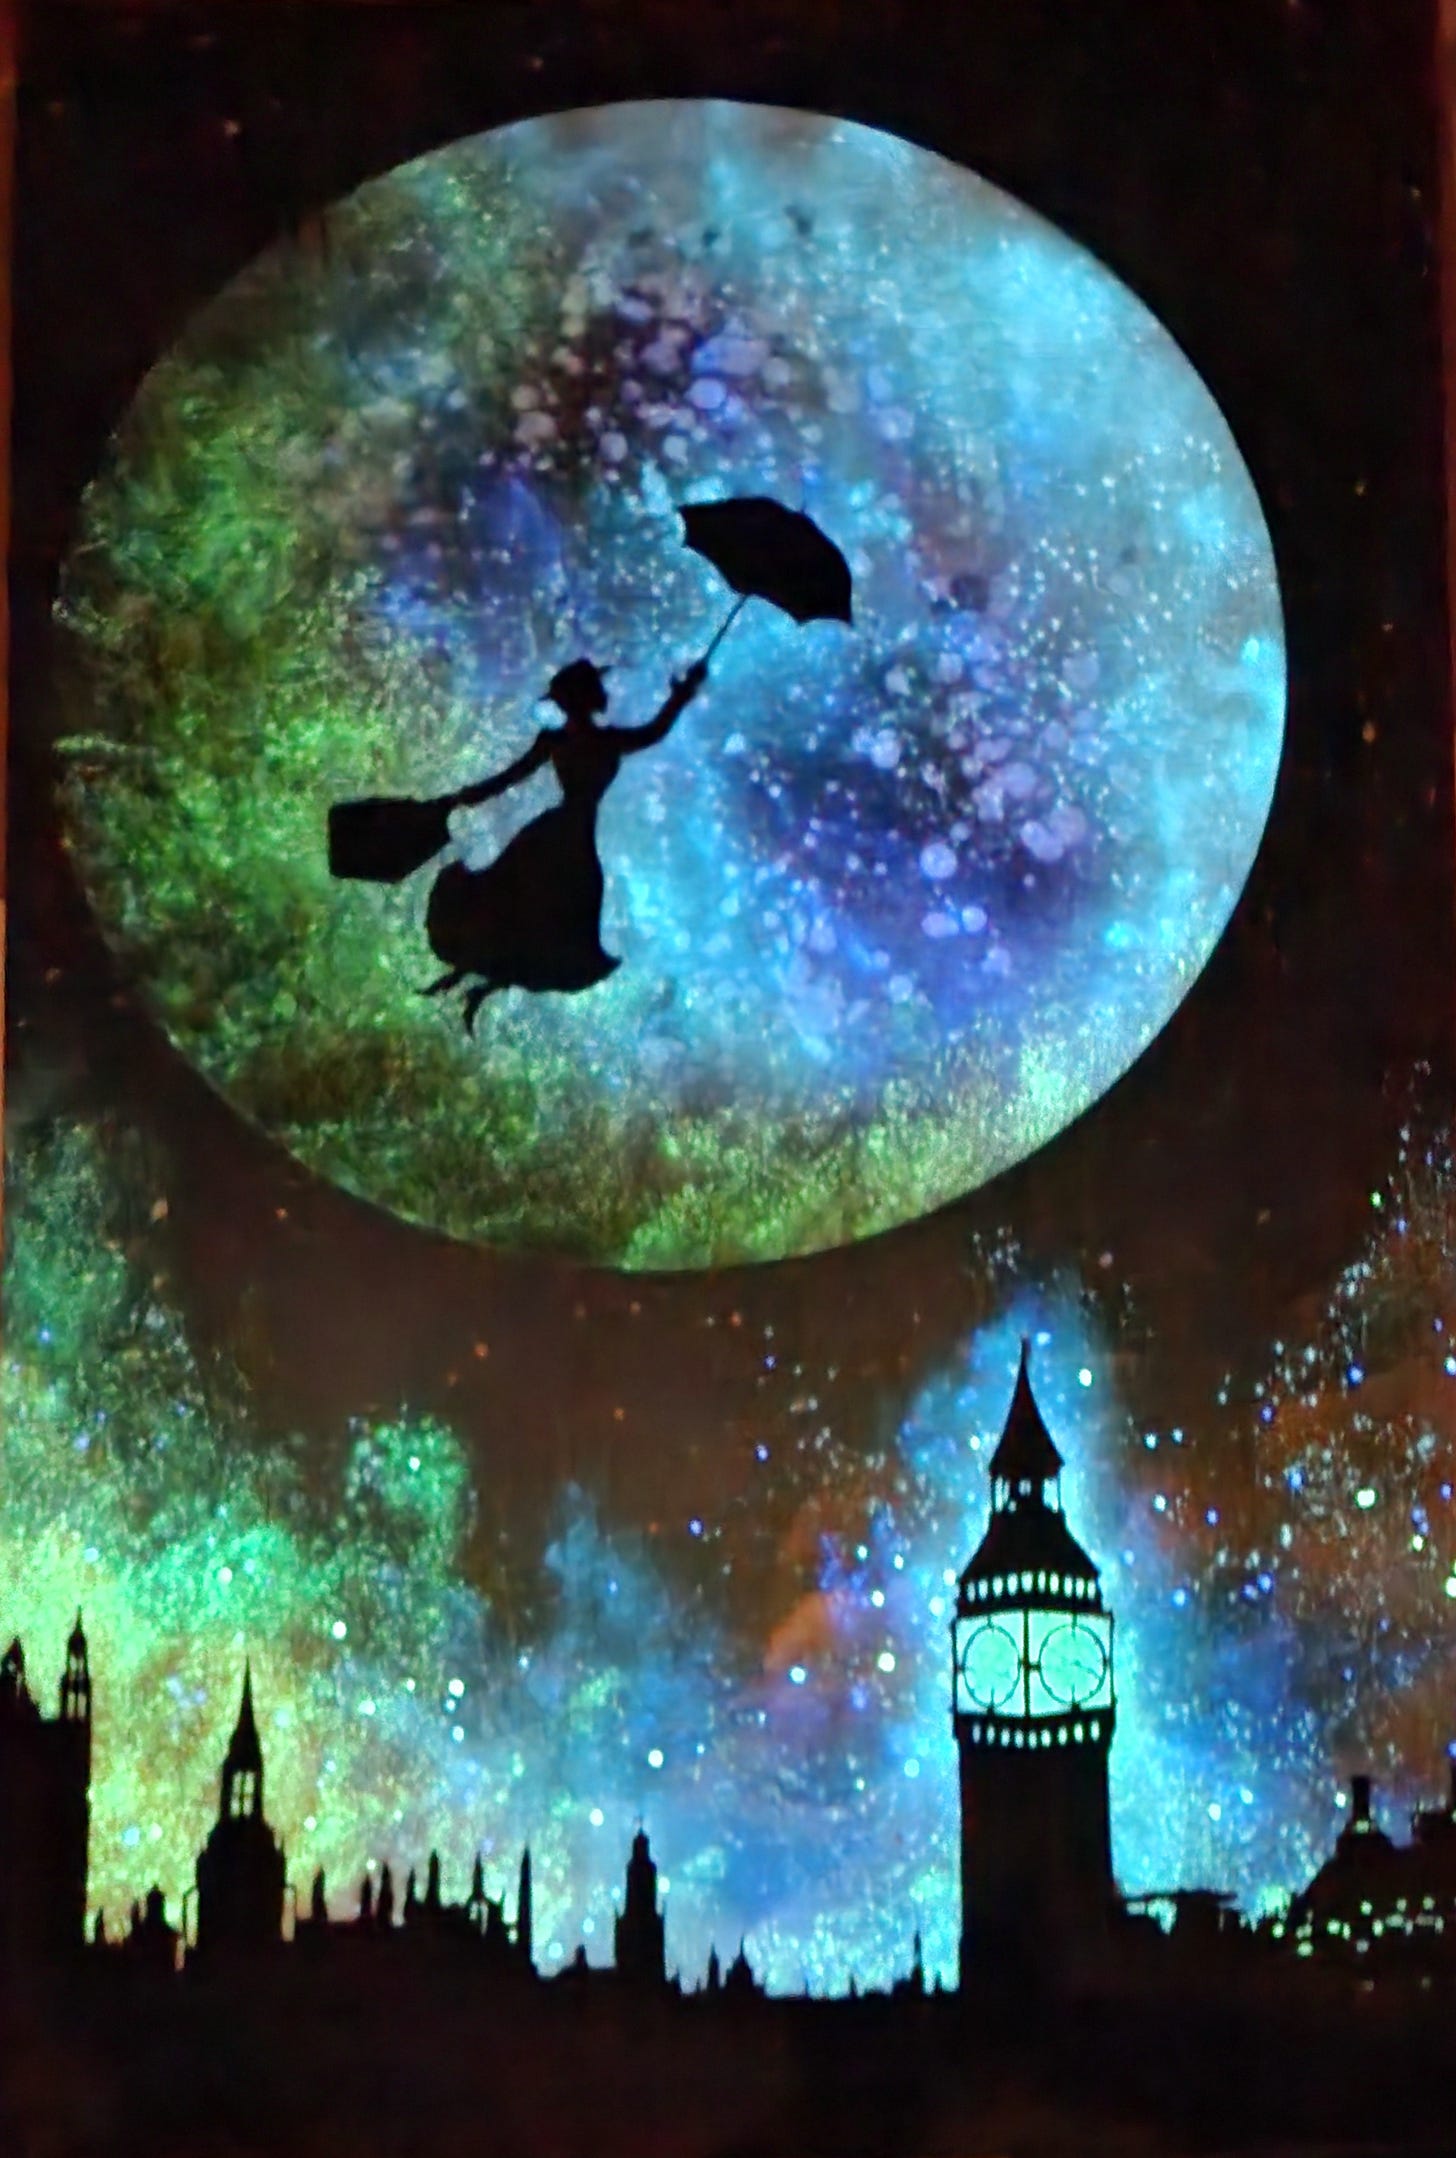 Night mode photo of the piece, which has a black silhouette of Mary Poppins and the Parliament/Big Ben clock tower in front of a glow in the dark moon and clouds 